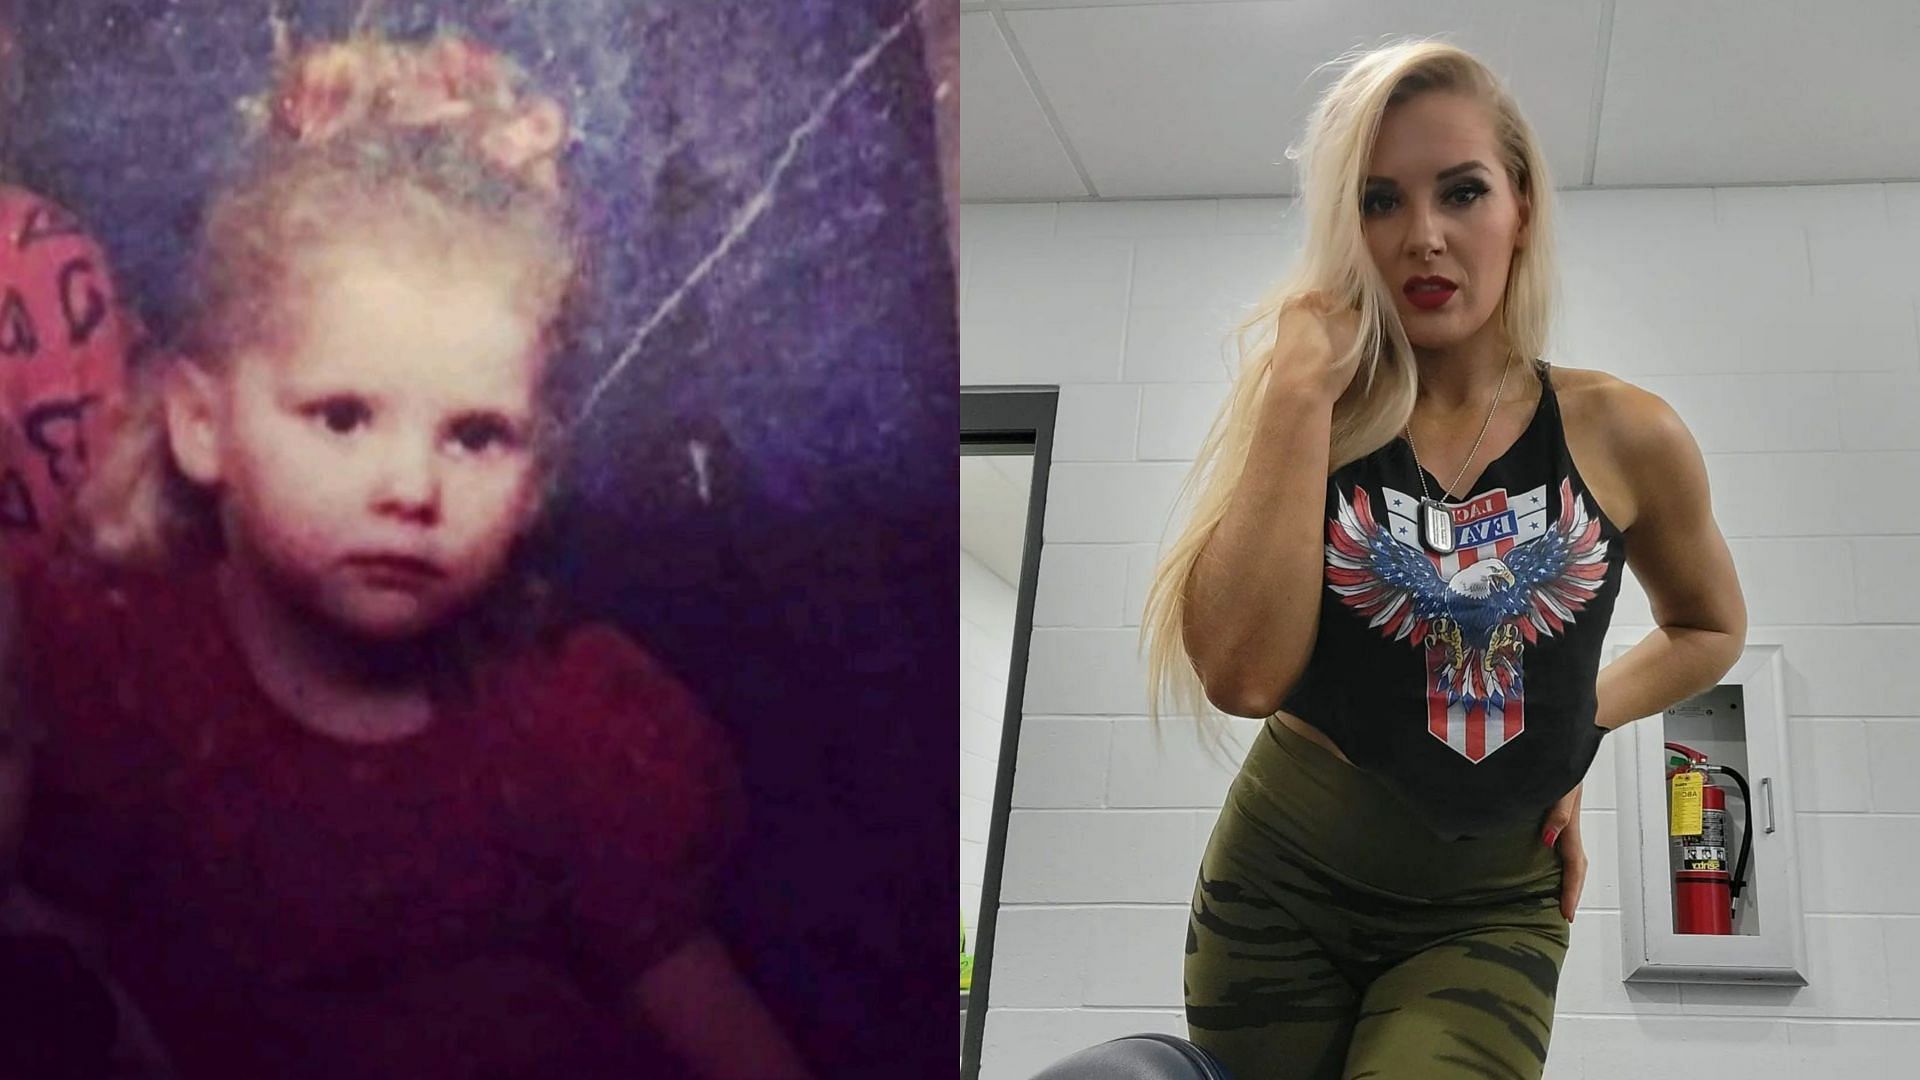 Lacey Evans is a former United States Marine